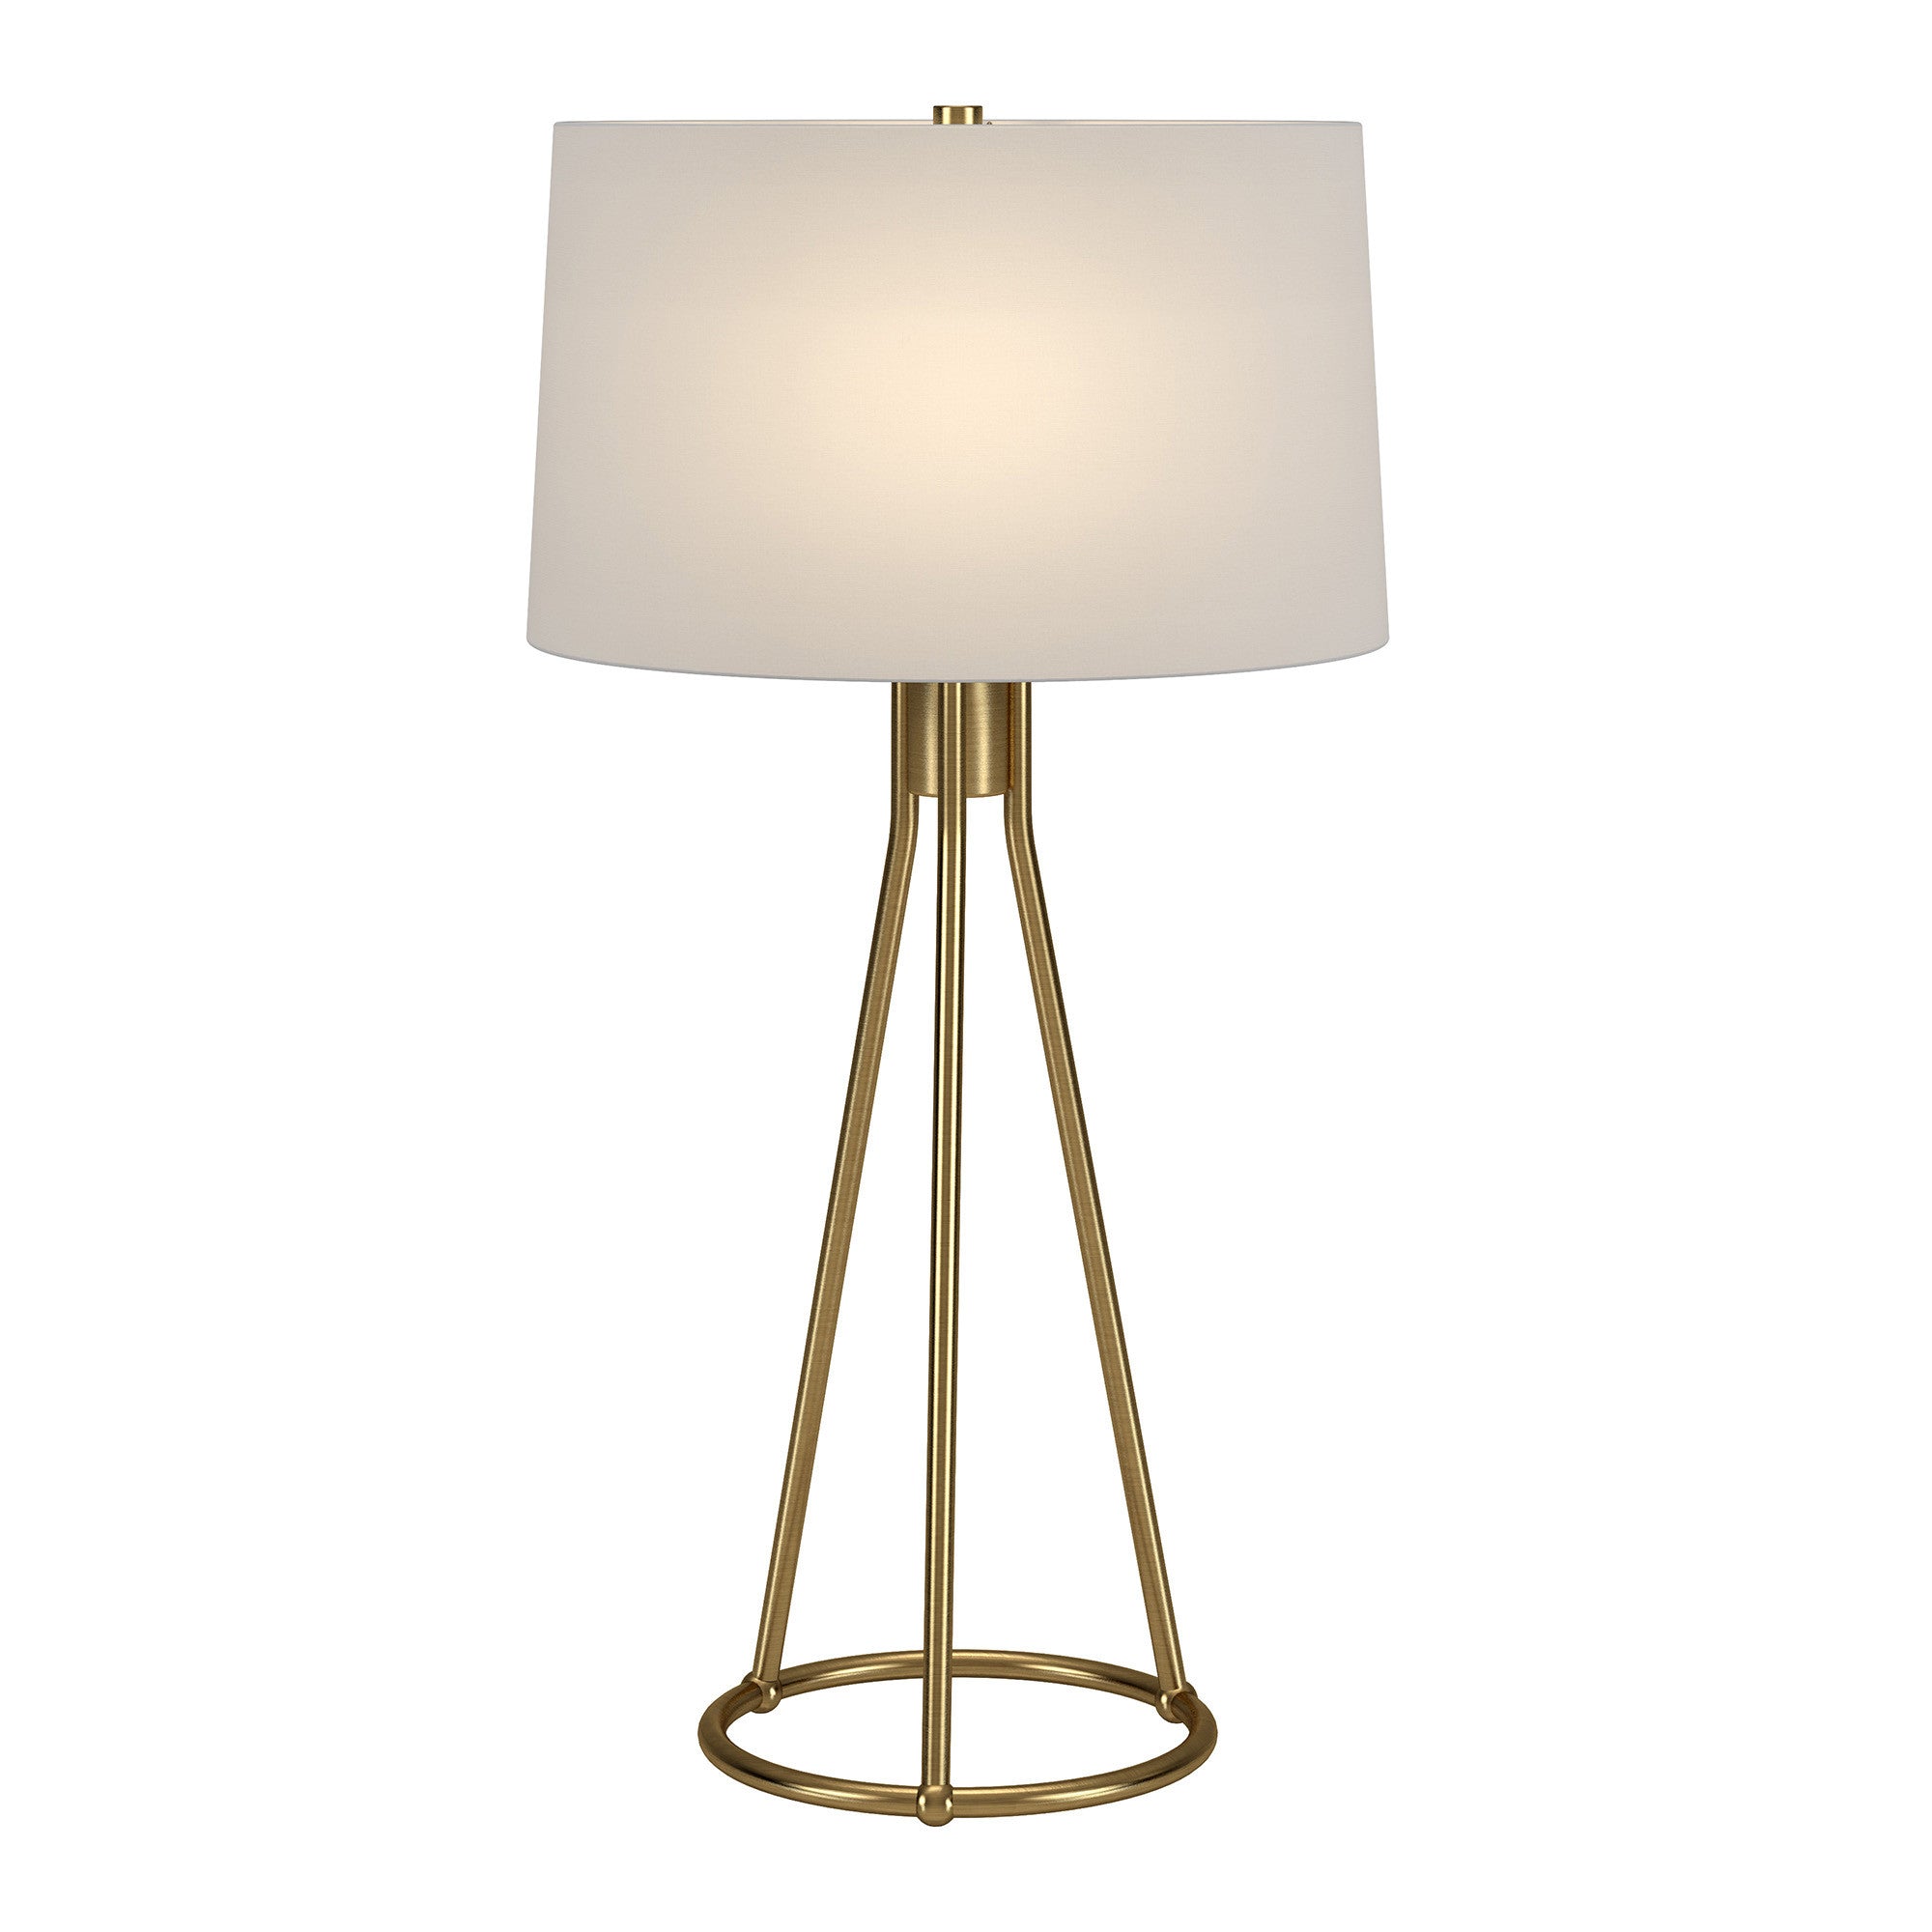 28" Brass Metal Table Lamp With White Drum Shade